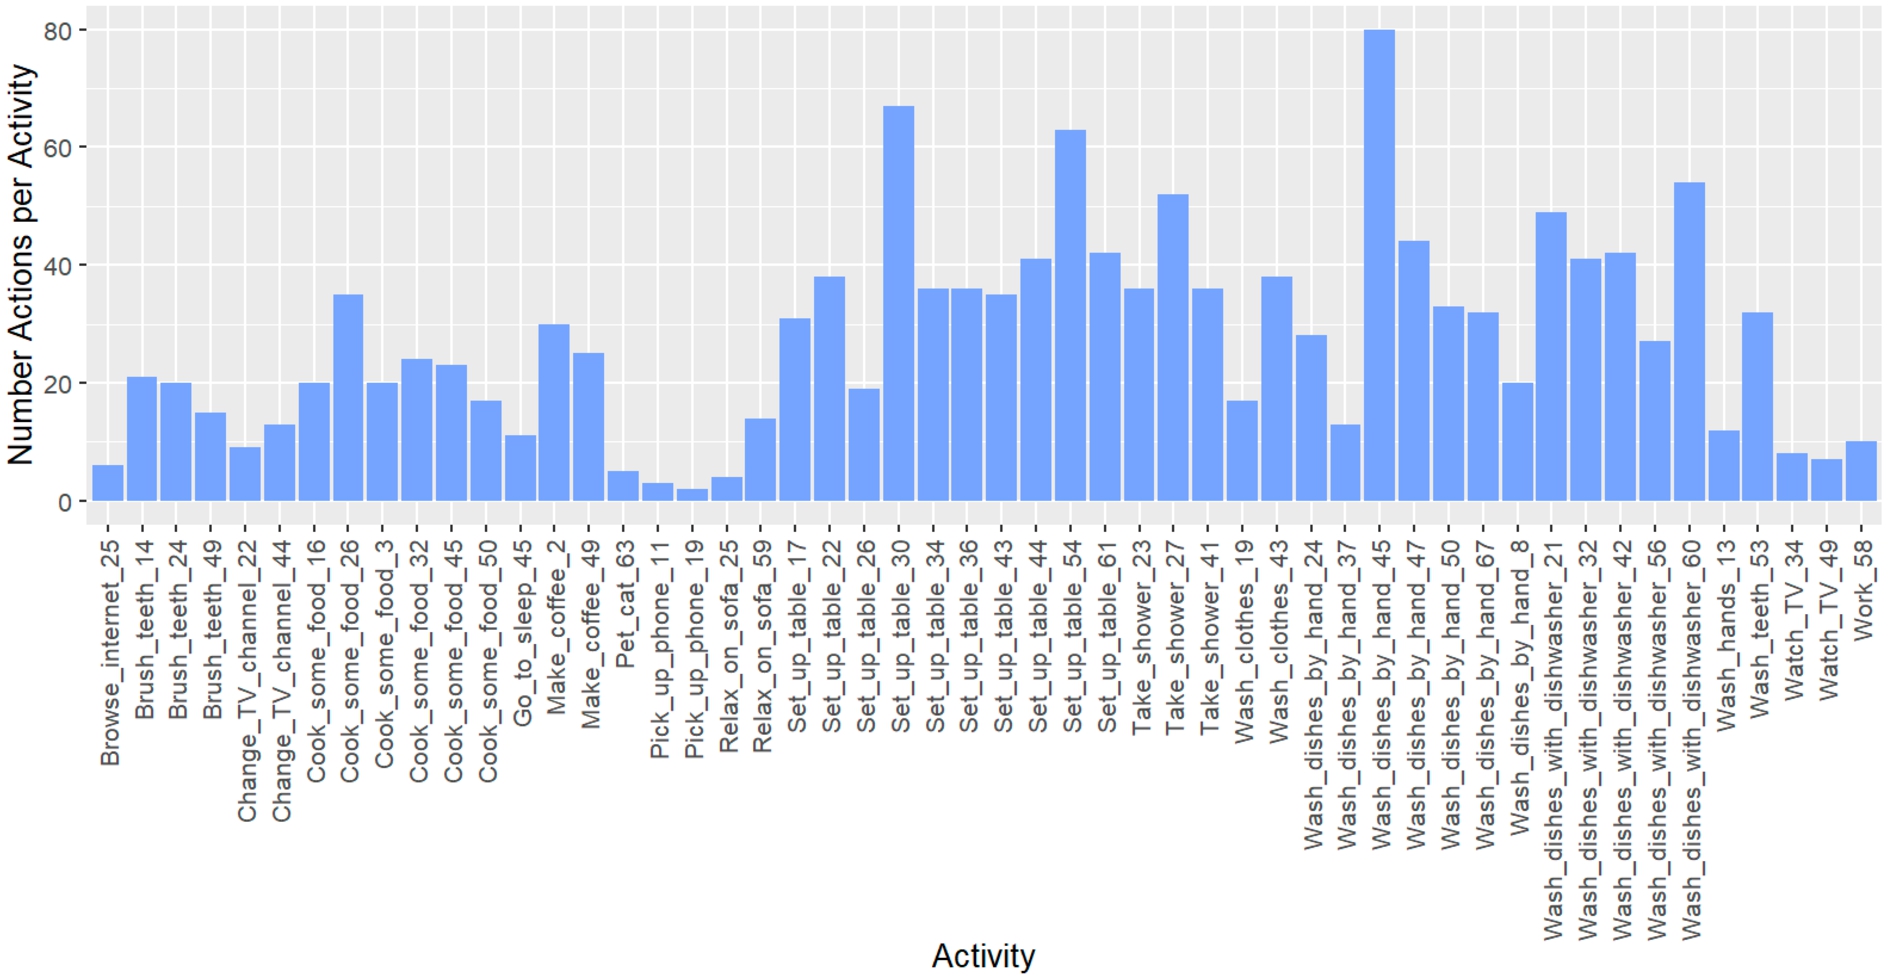 Distribution of the action sequence length (y-axis) among all 52 activities (x-axis) evaluated.